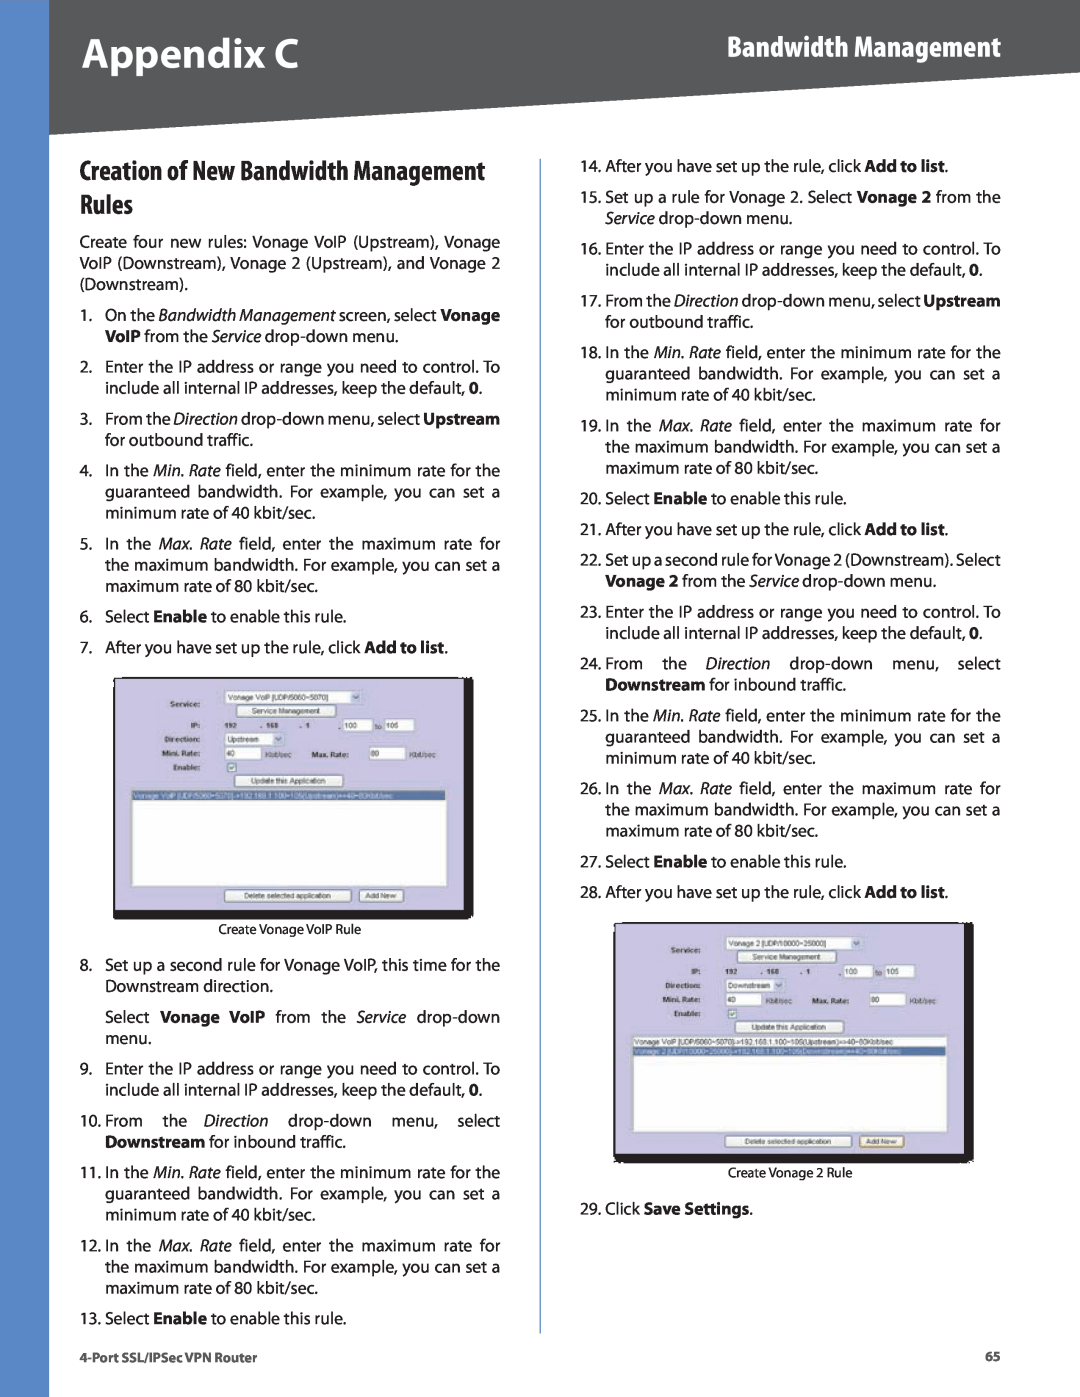 Cisco Systems RVL200 manual Creation of New Bandwidth Management Rules, Click Save Settings, Appendix C 